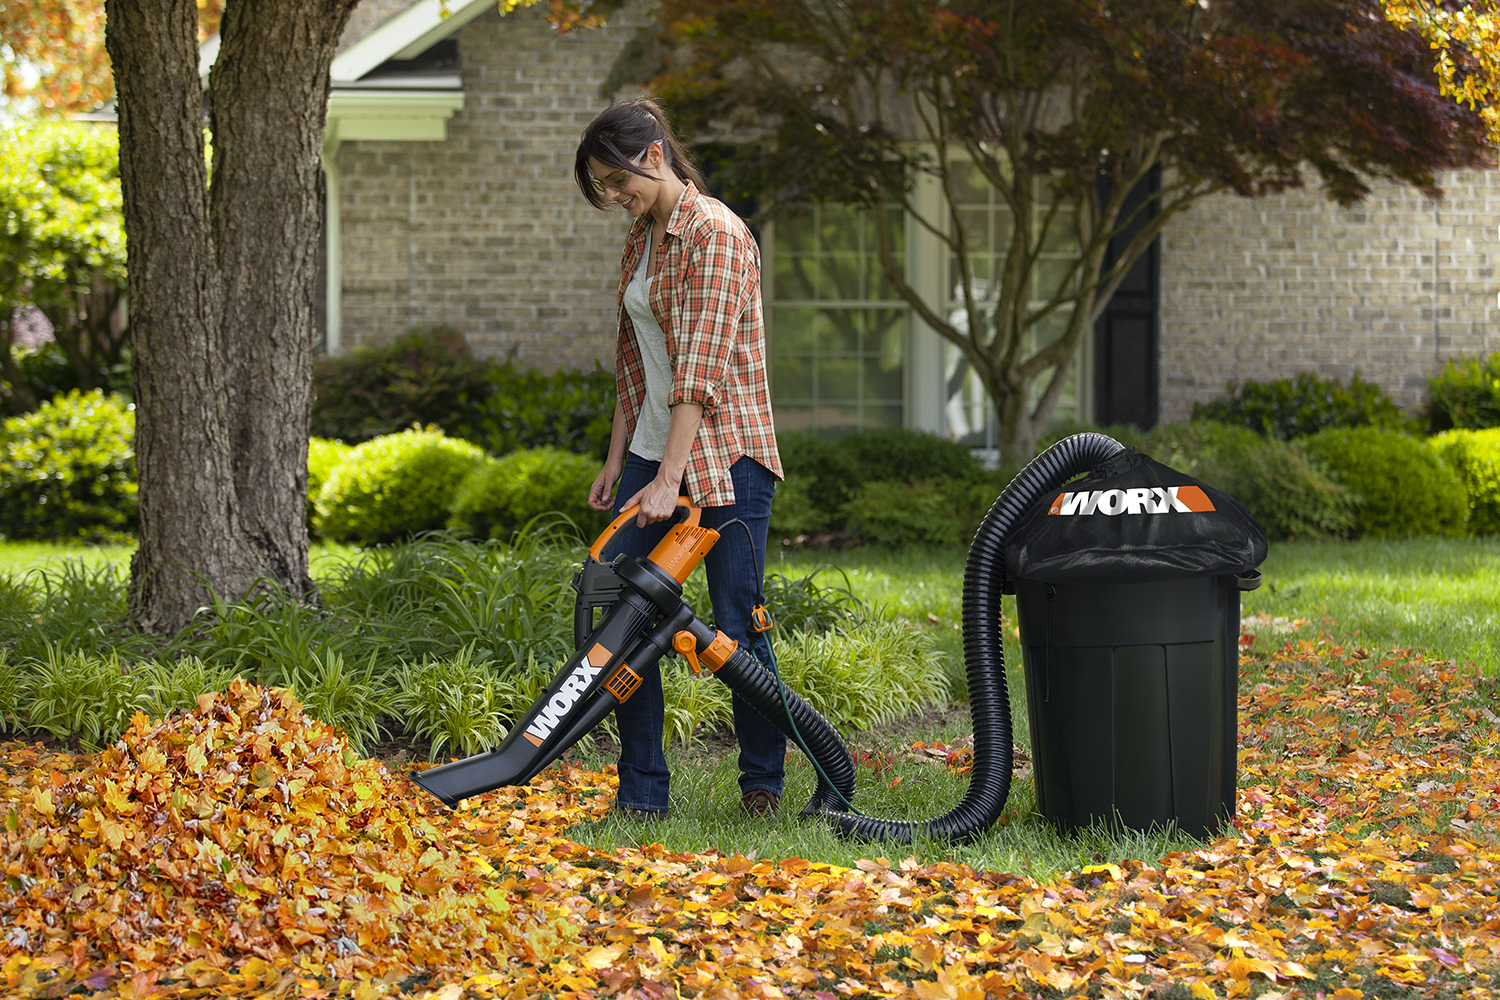 WORX LeafPro Universal Collection System makes fall cleanup chores a breeze